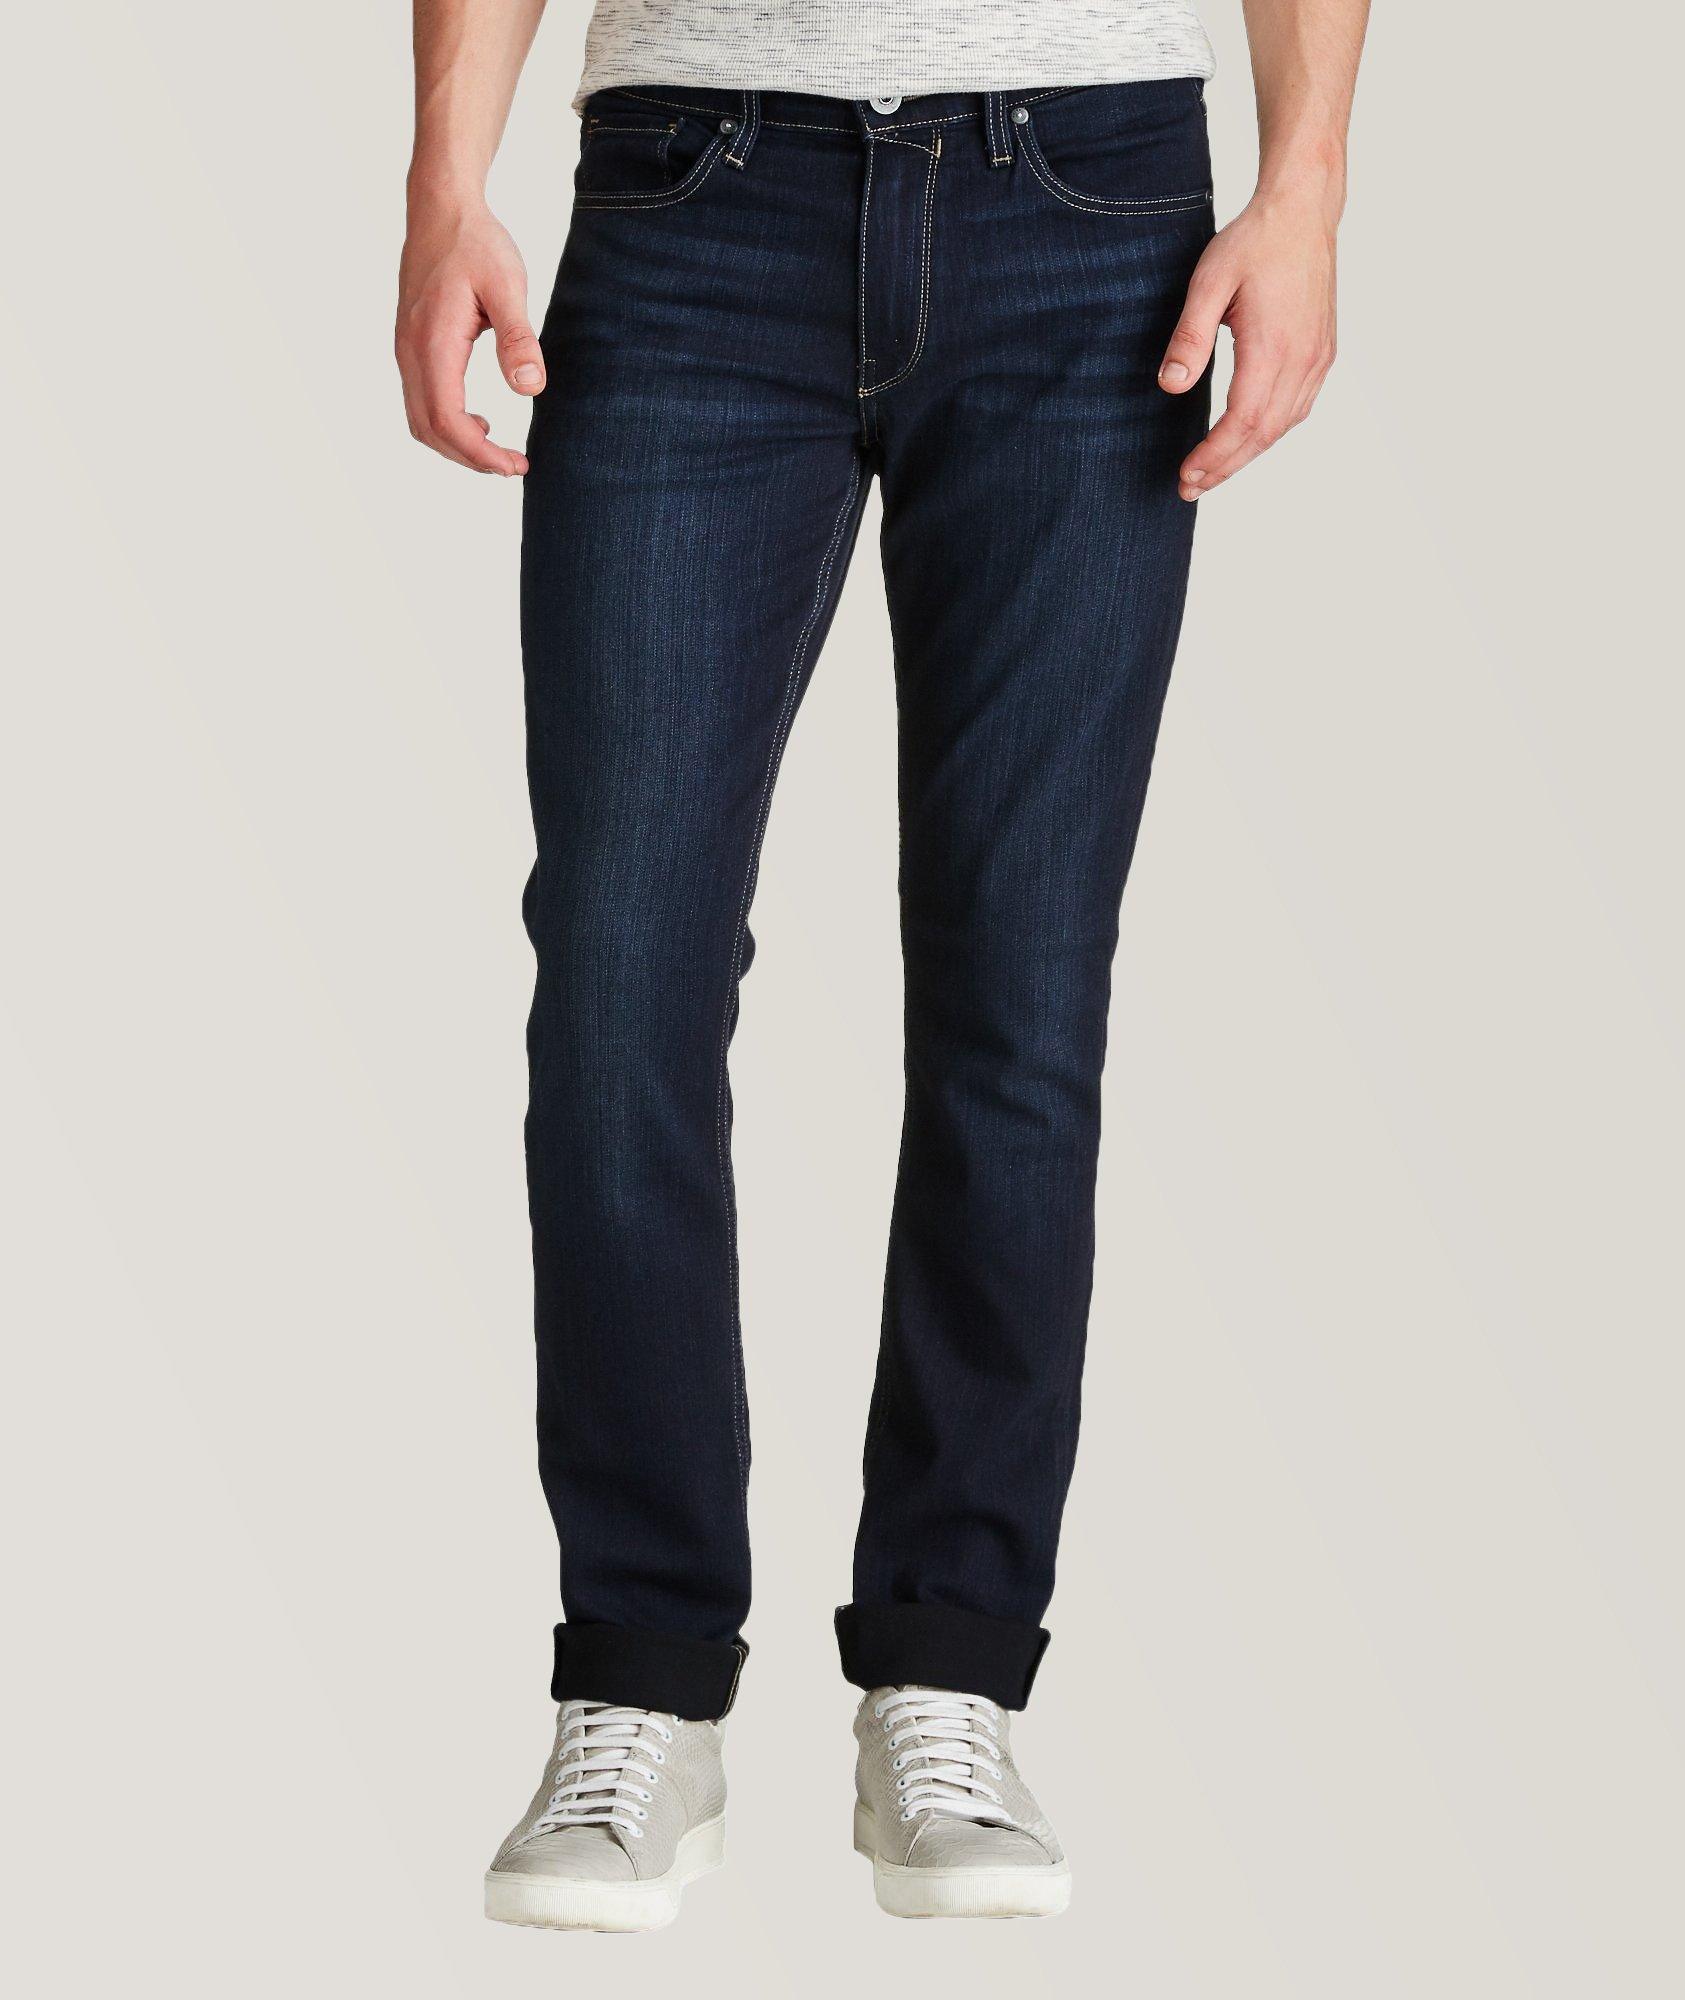 PAIGE Federal Slim Straight In Transcend Pants in Blue for Men